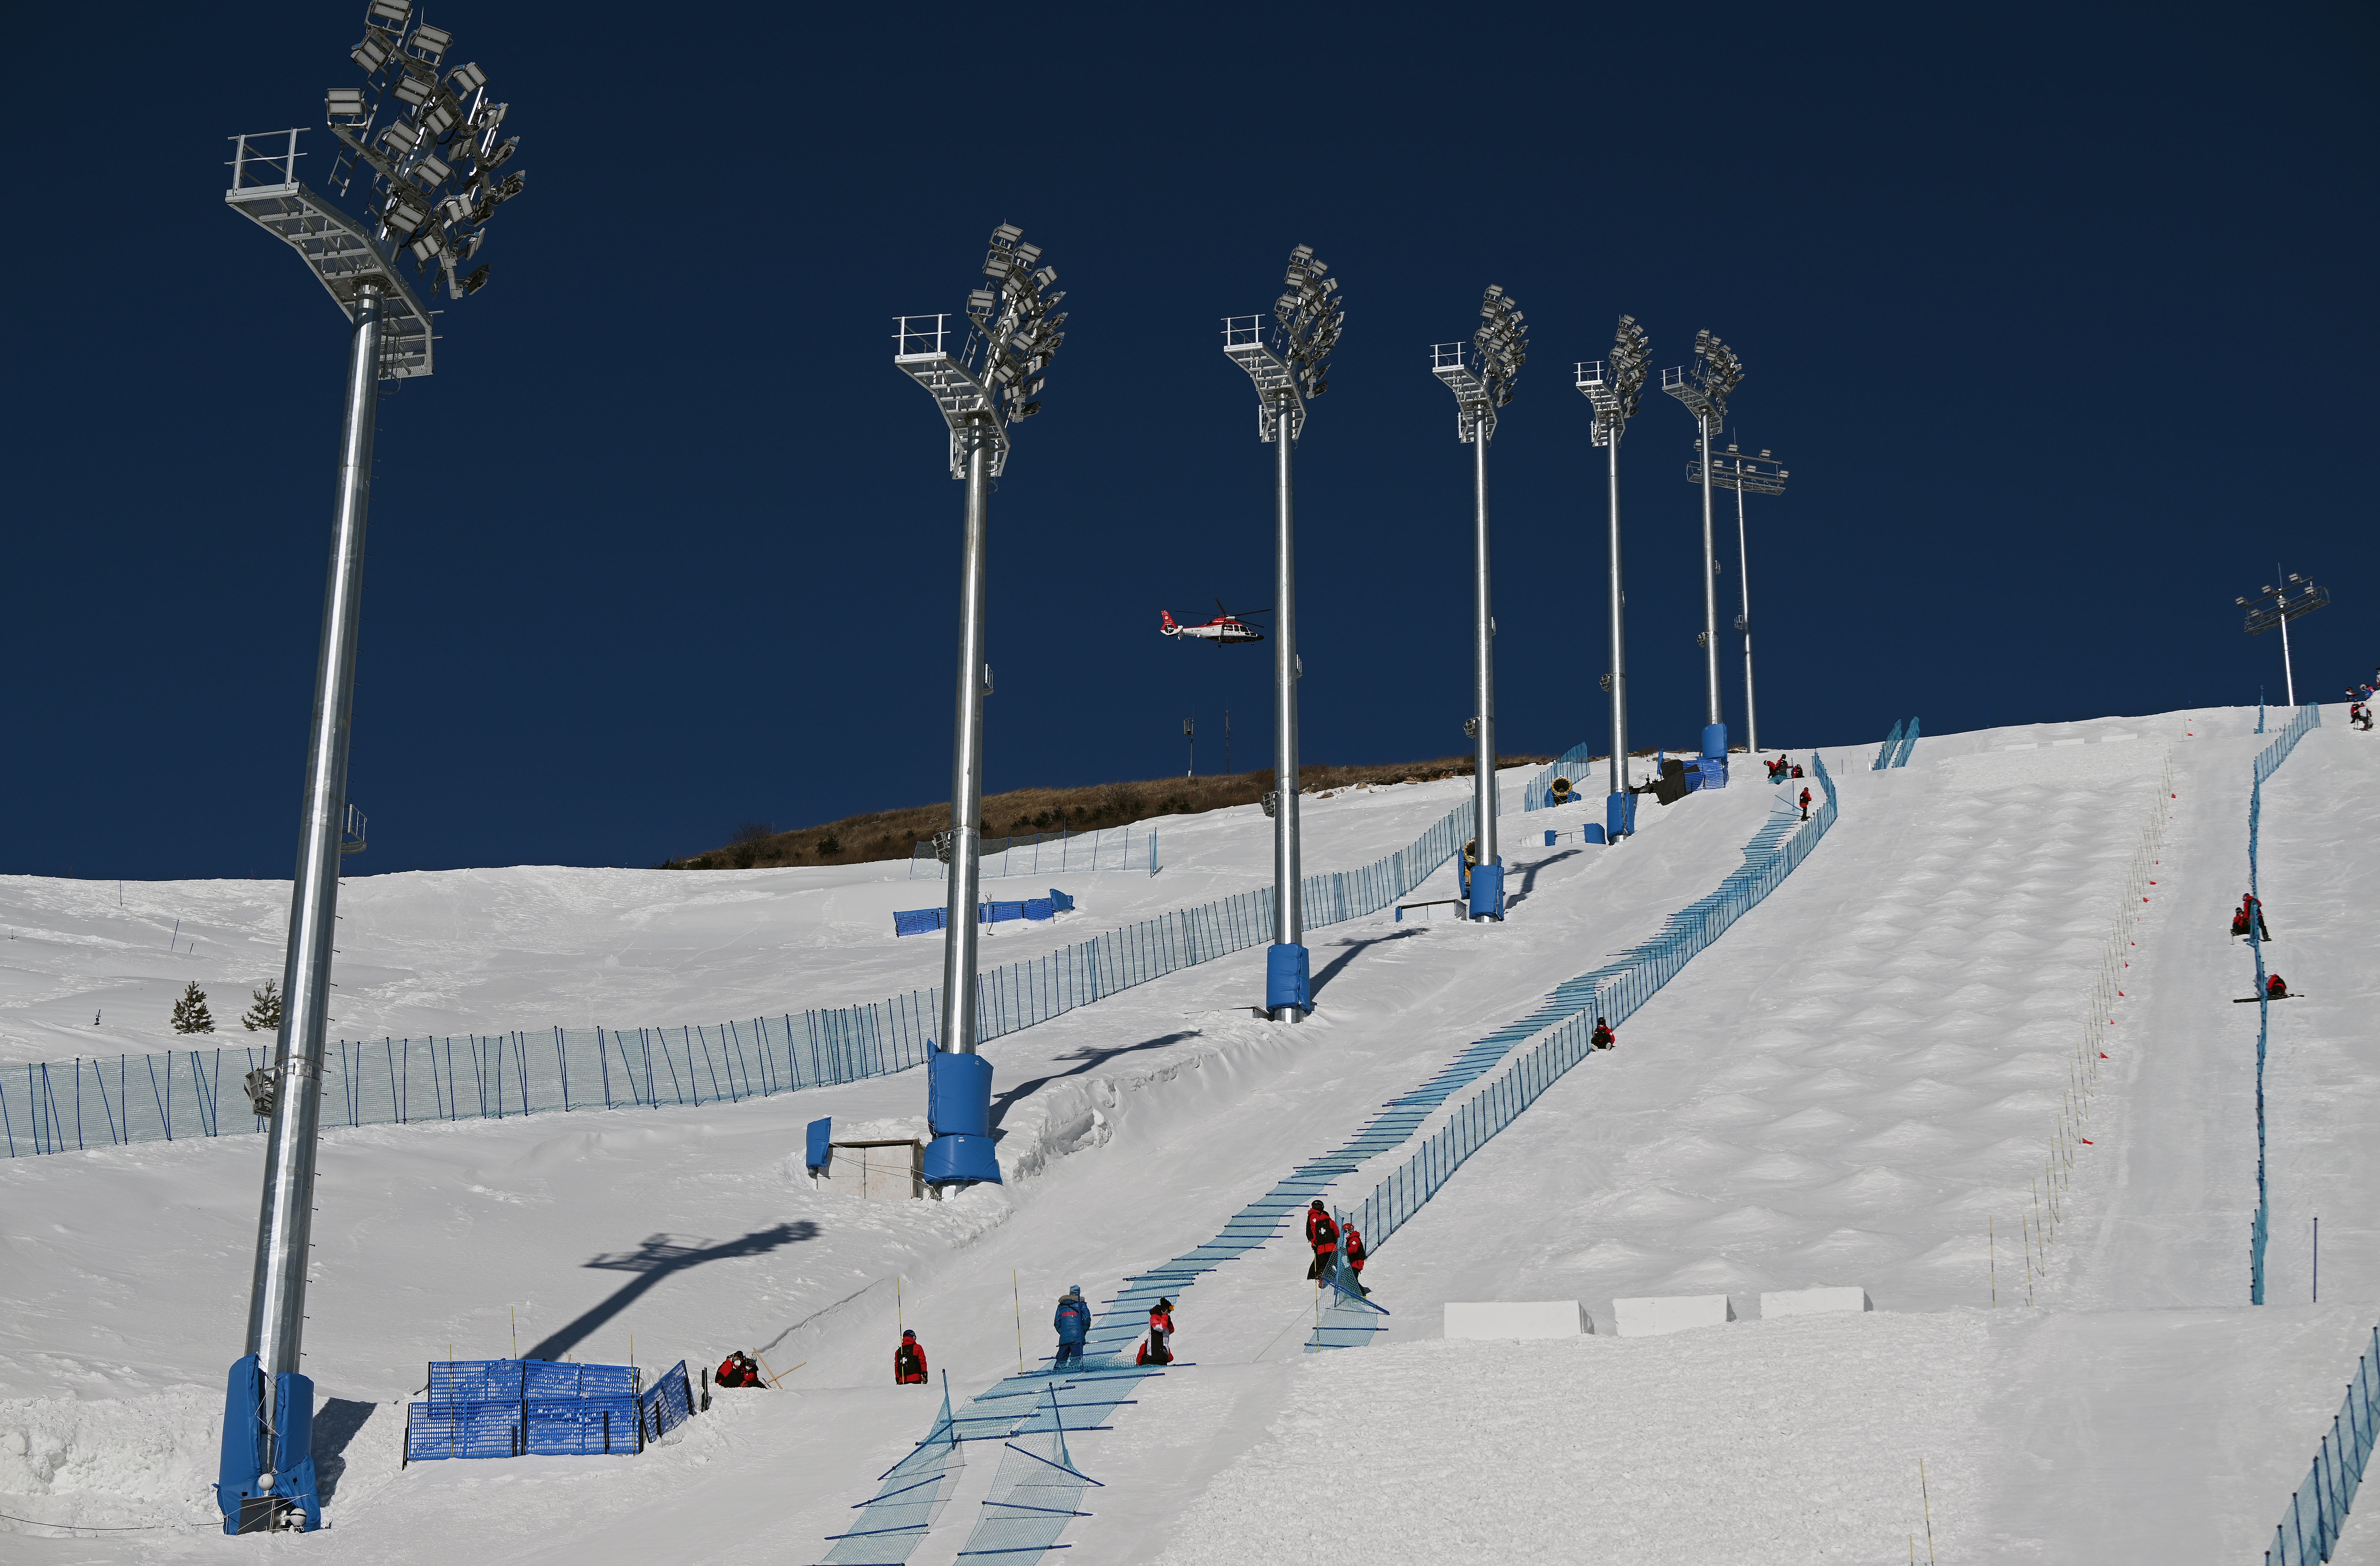 The Beijing Games is the first Winter Olympics to use almost 100 percent artificial snow